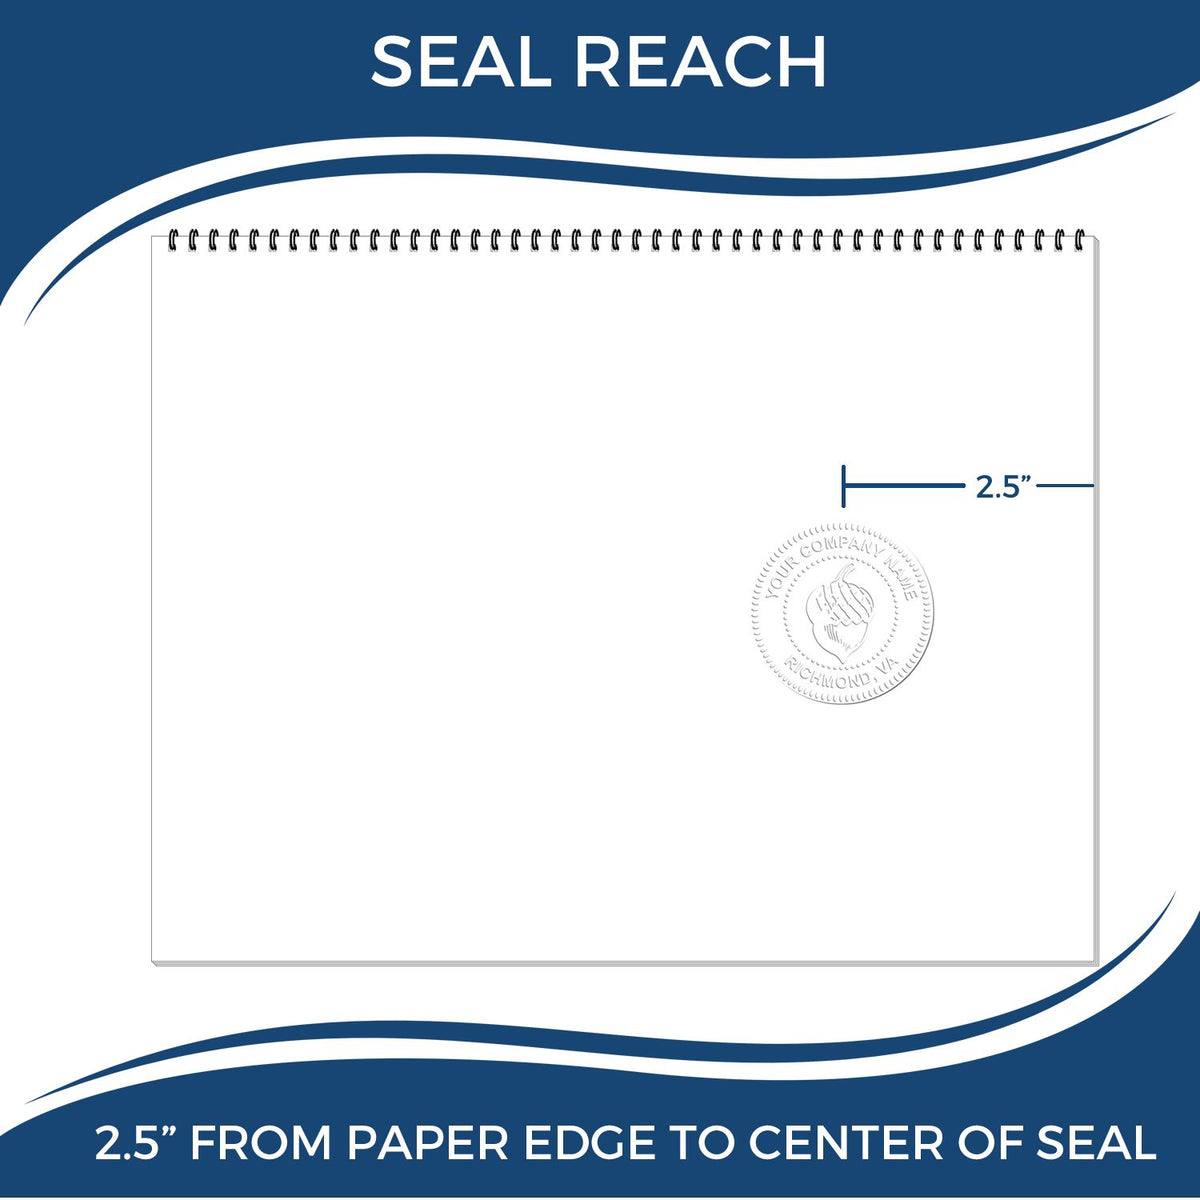 An infographic showing the seal reach which is represented by a ruler and a miniature seal image of the Long Reach Idaho Land Surveyor Seal